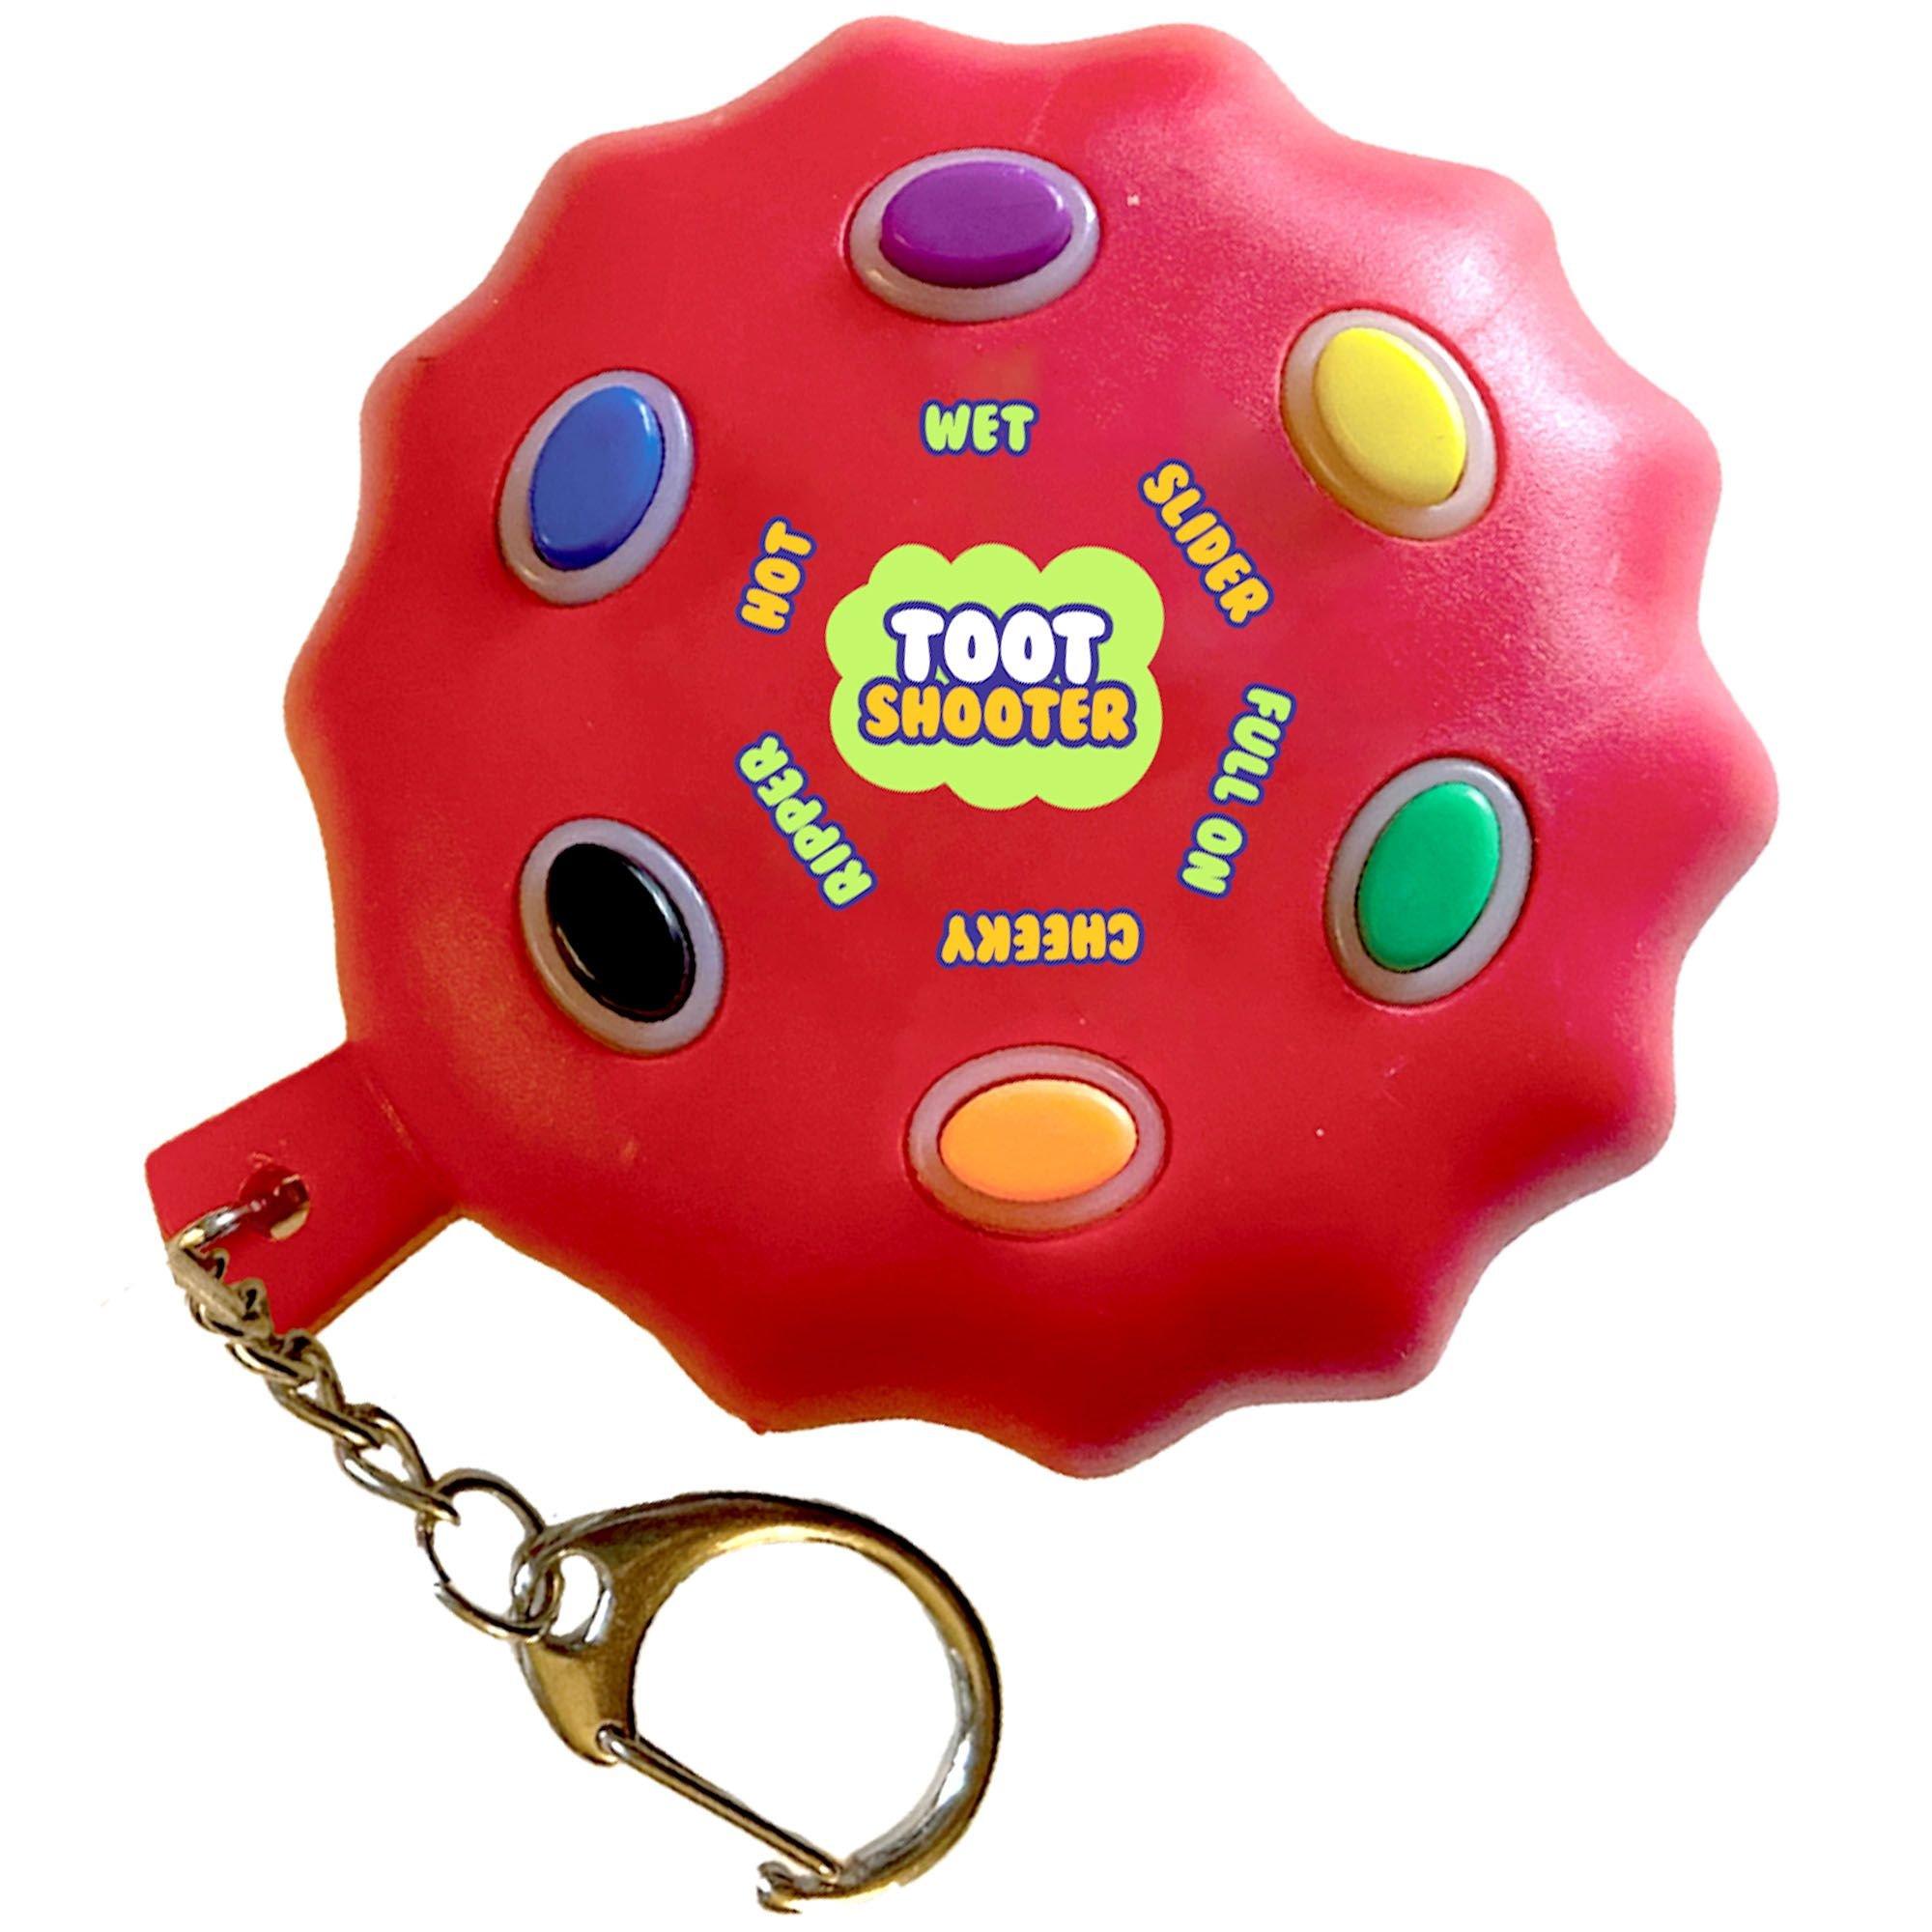 fart sound toy, fart sound toy Suppliers and Manufacturers at